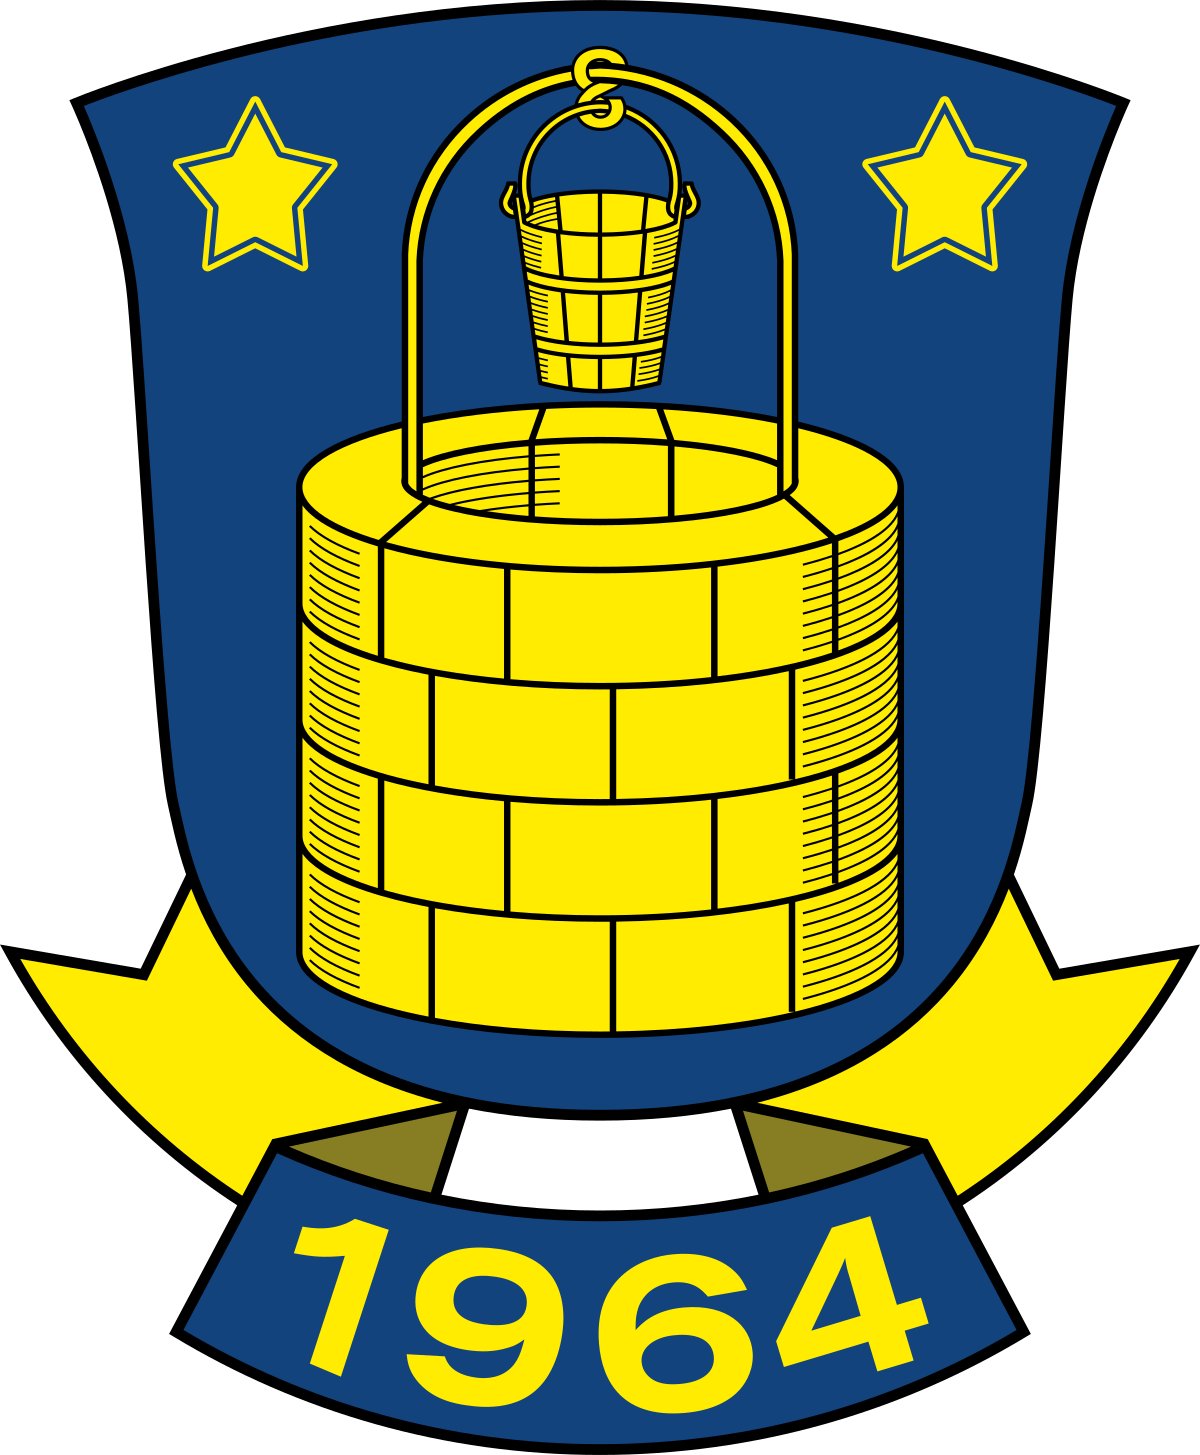 Brondby IF (W)